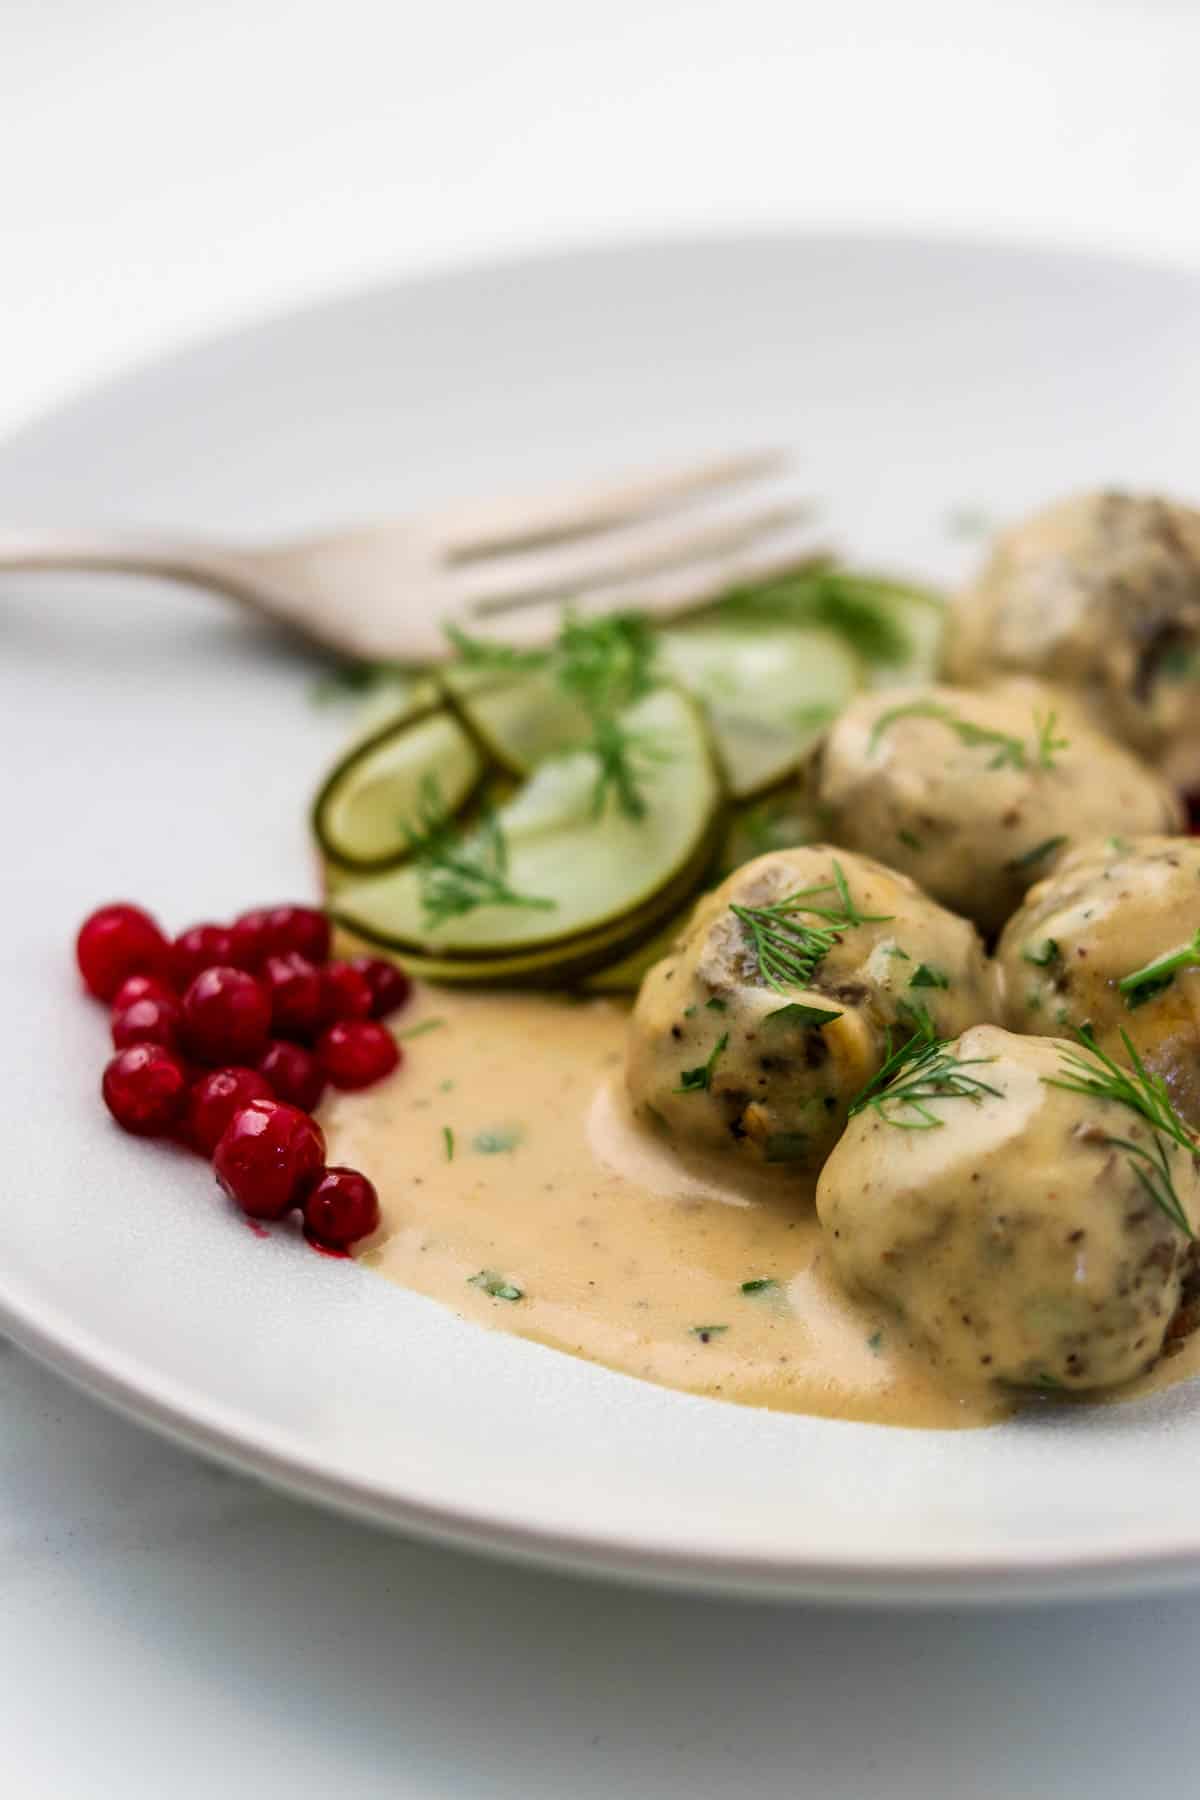 Vegetarian Swedish Meatballs on a plate with lingonberries and cucumbers.